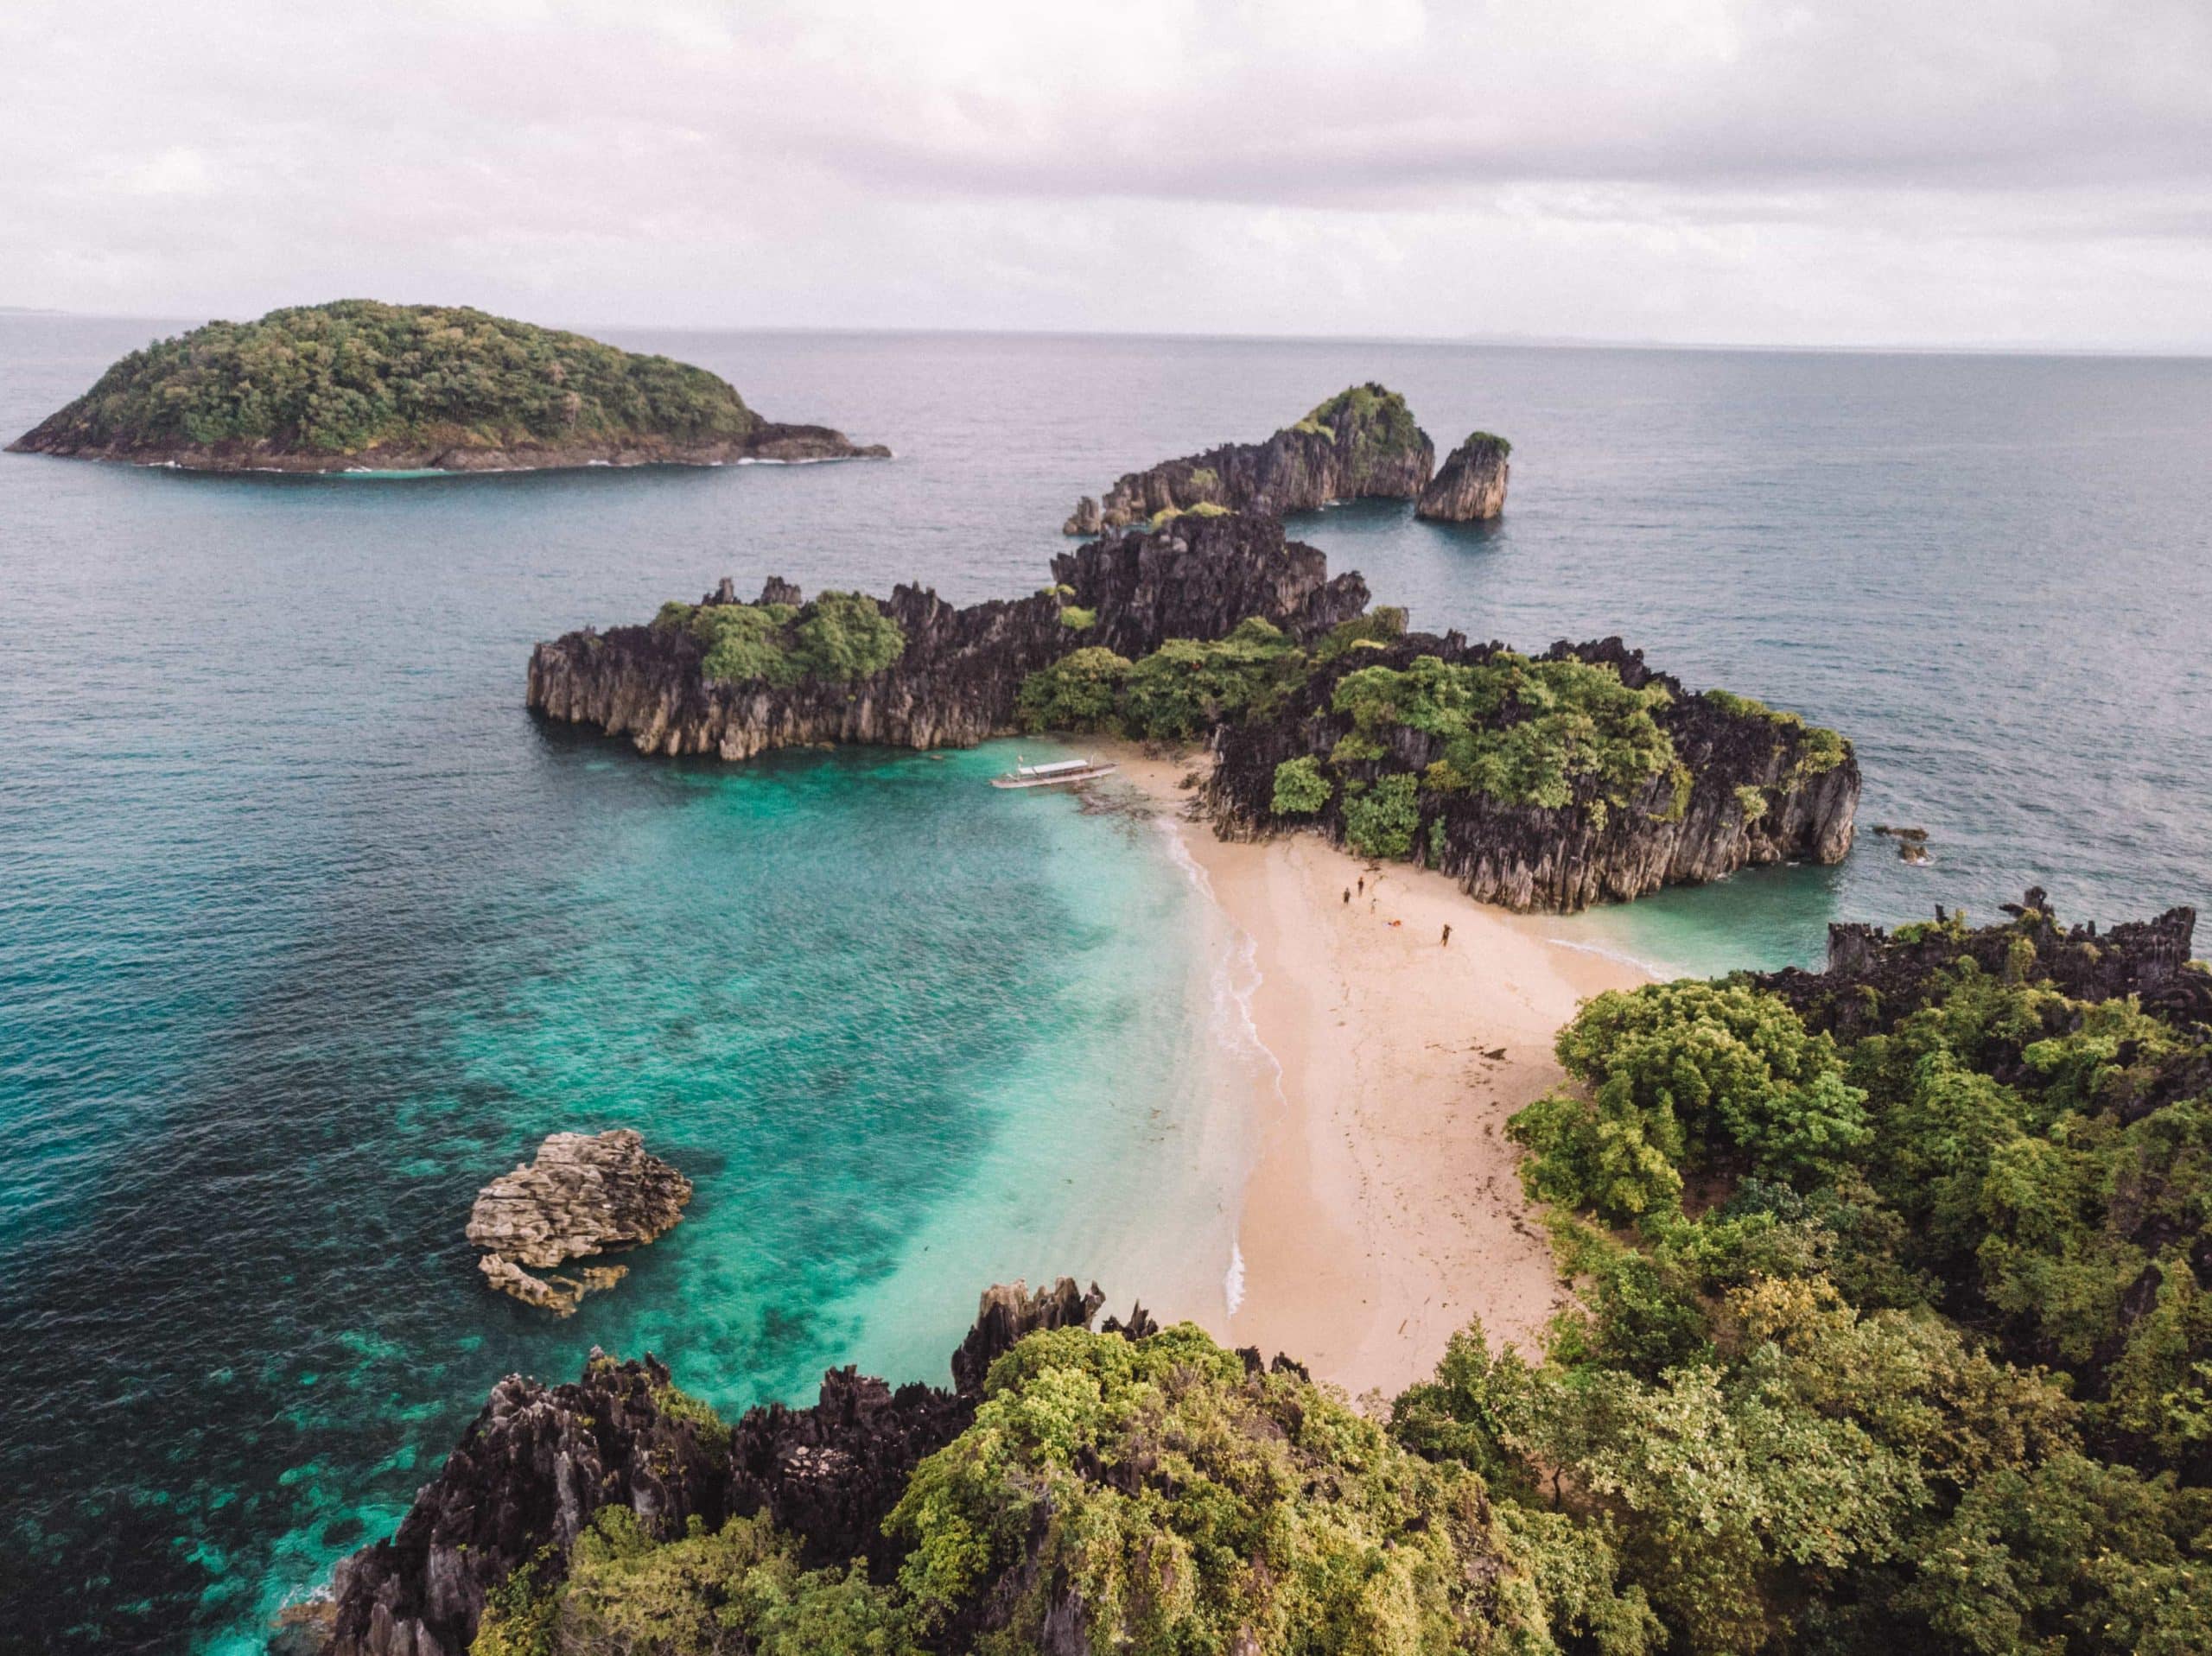 Philippines beaches, hotels in caramoan, resorts in caramoan